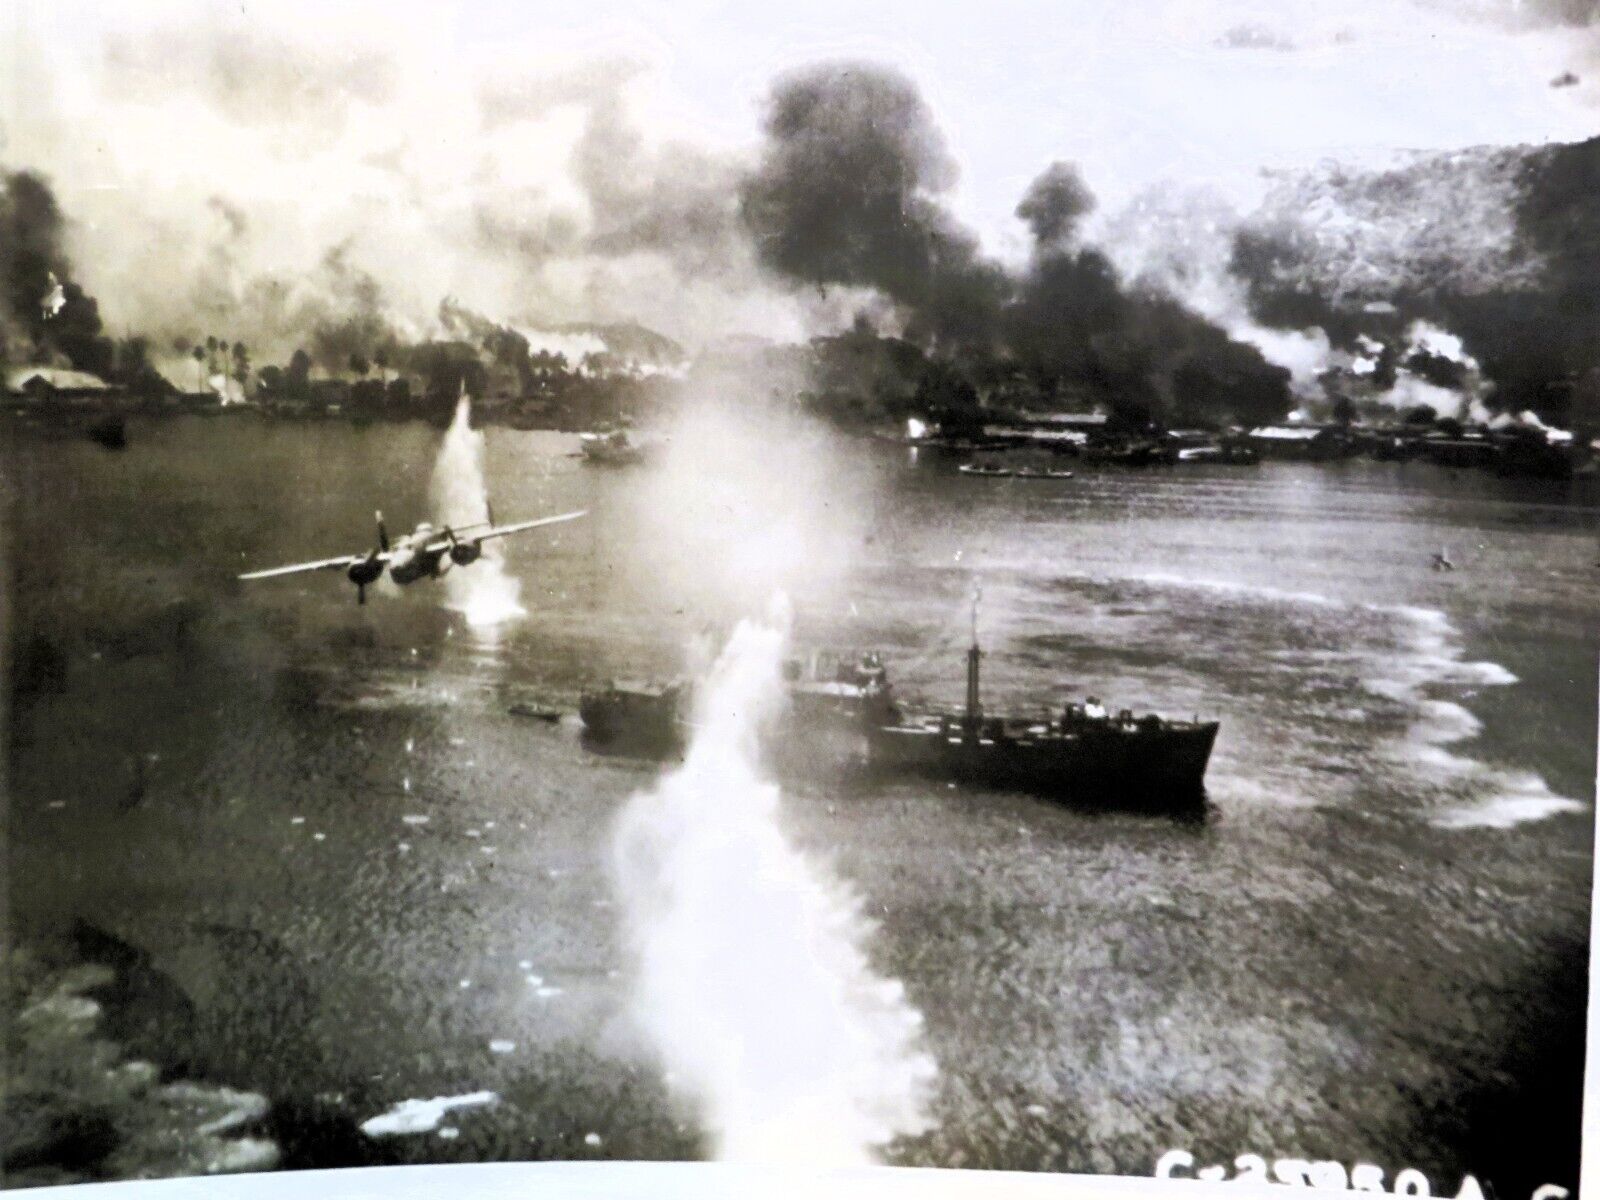 ORIGINAL US ARMY AIR FORCE PHOTO WW2:  RABAUL HARBOR POUNDED